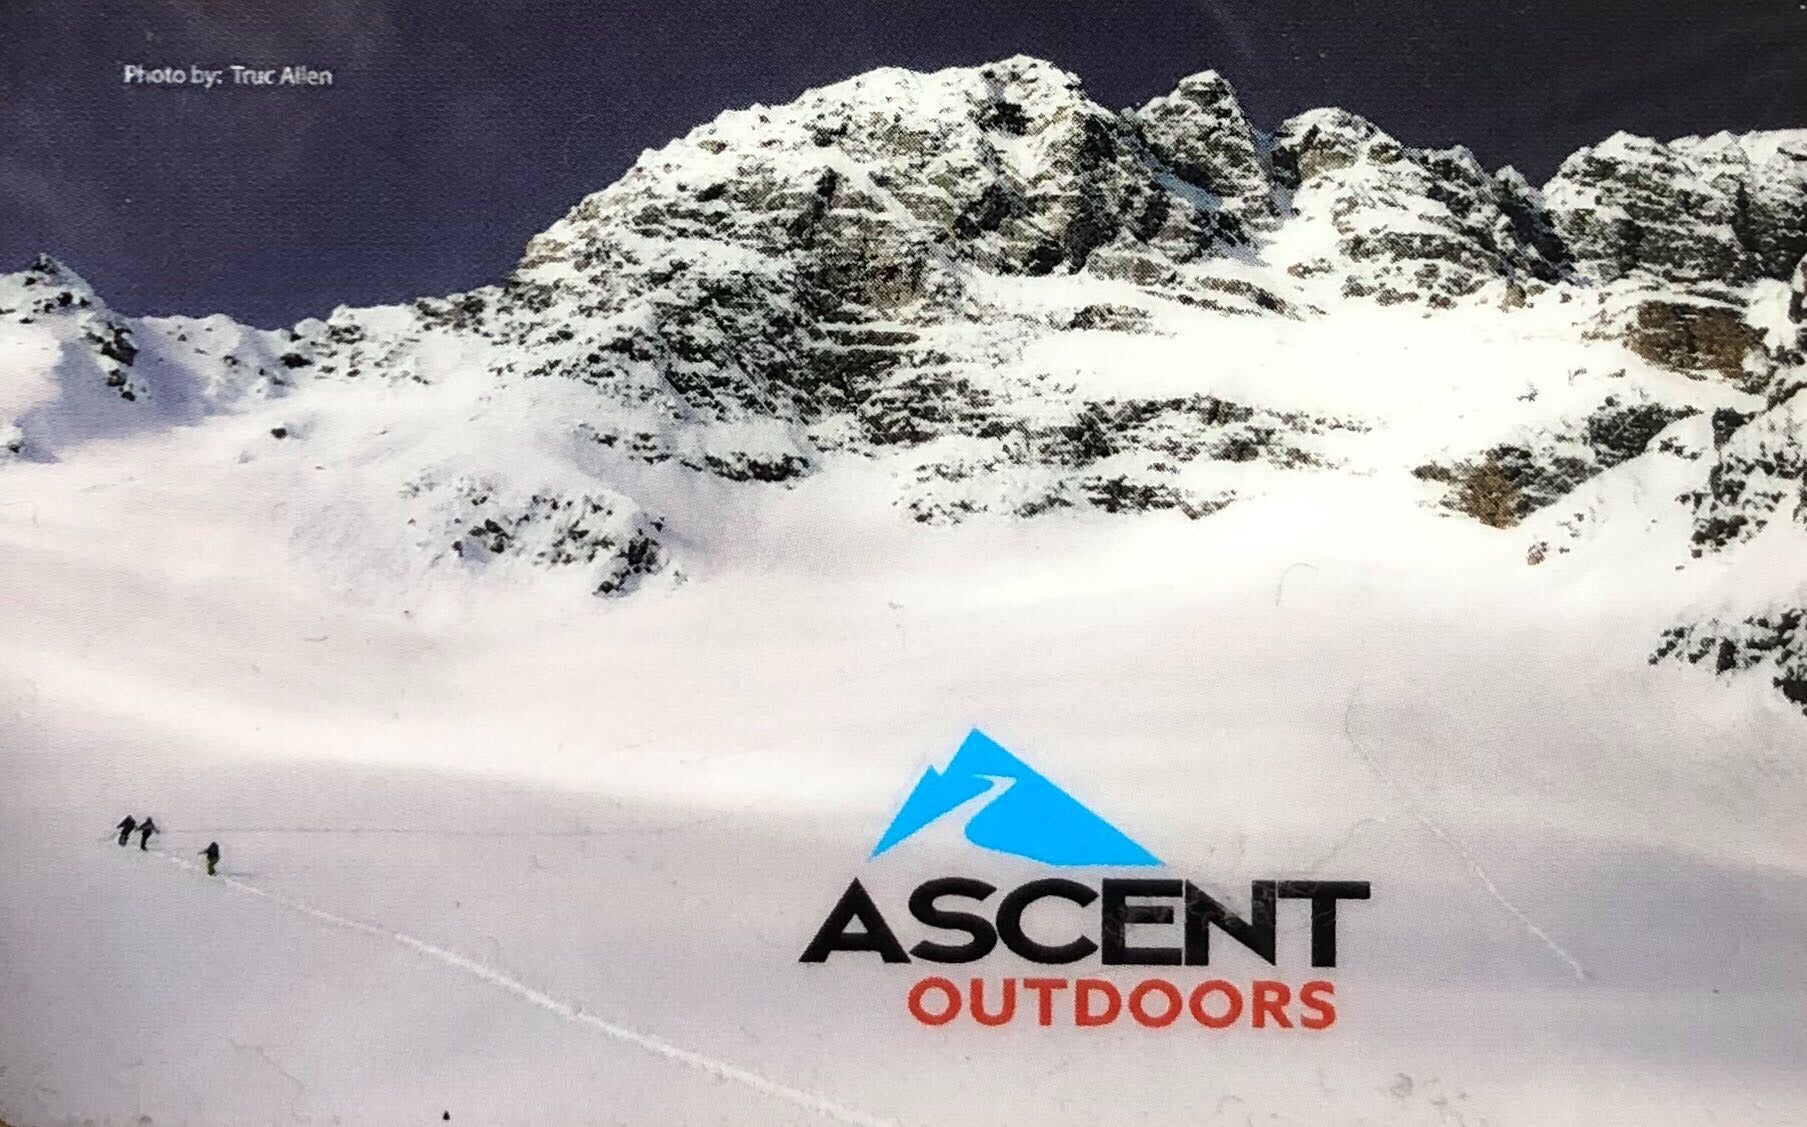 Ascent Outdoors Physical Gift Card - Ascent Outdoors LLC